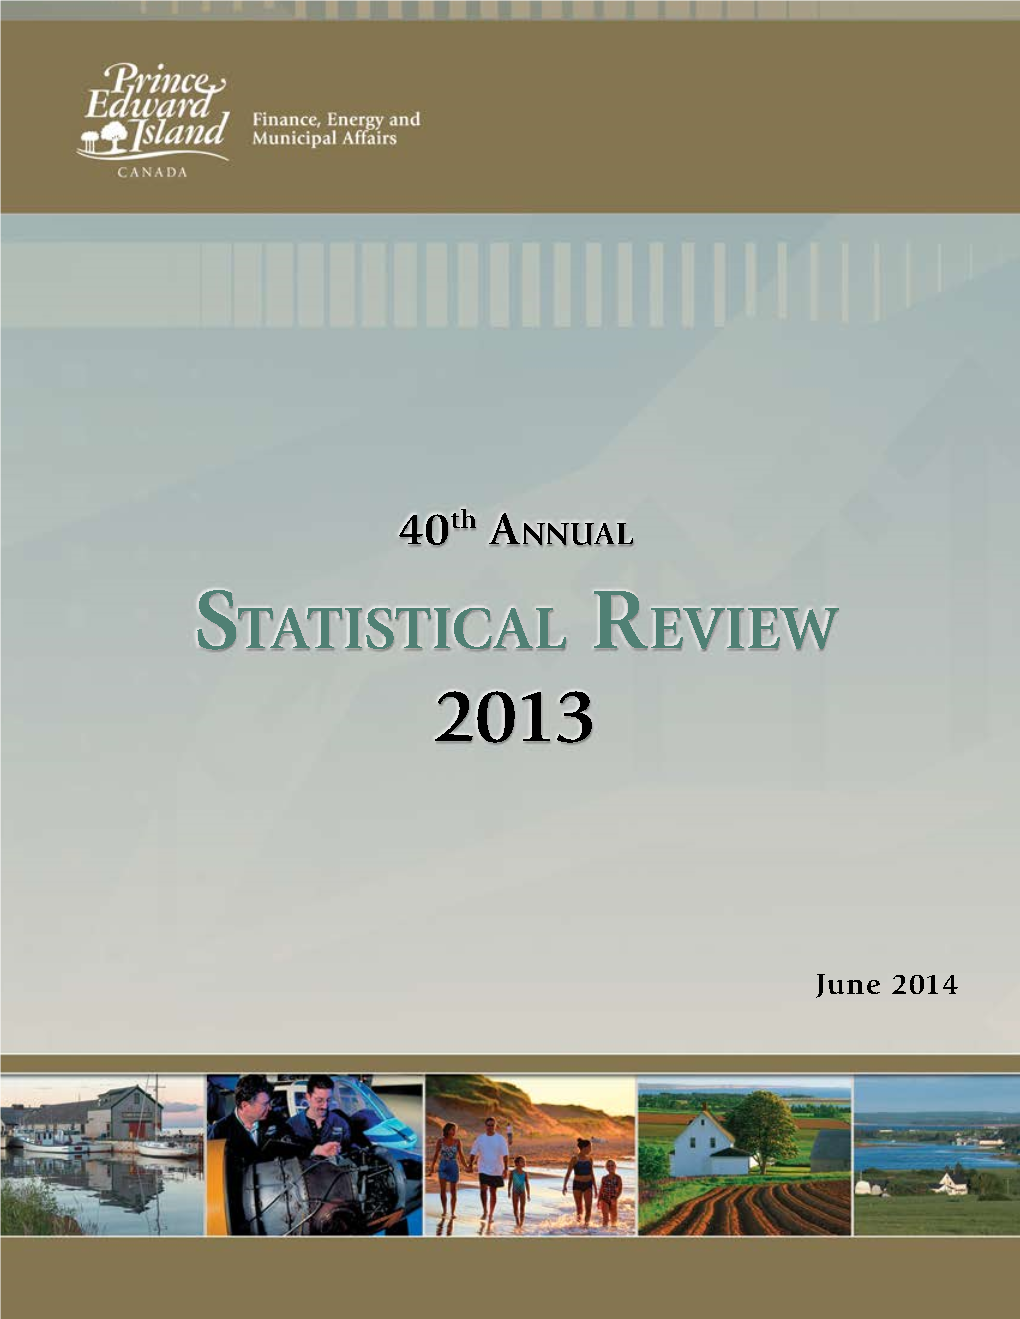 Annual Statistical Review 2013